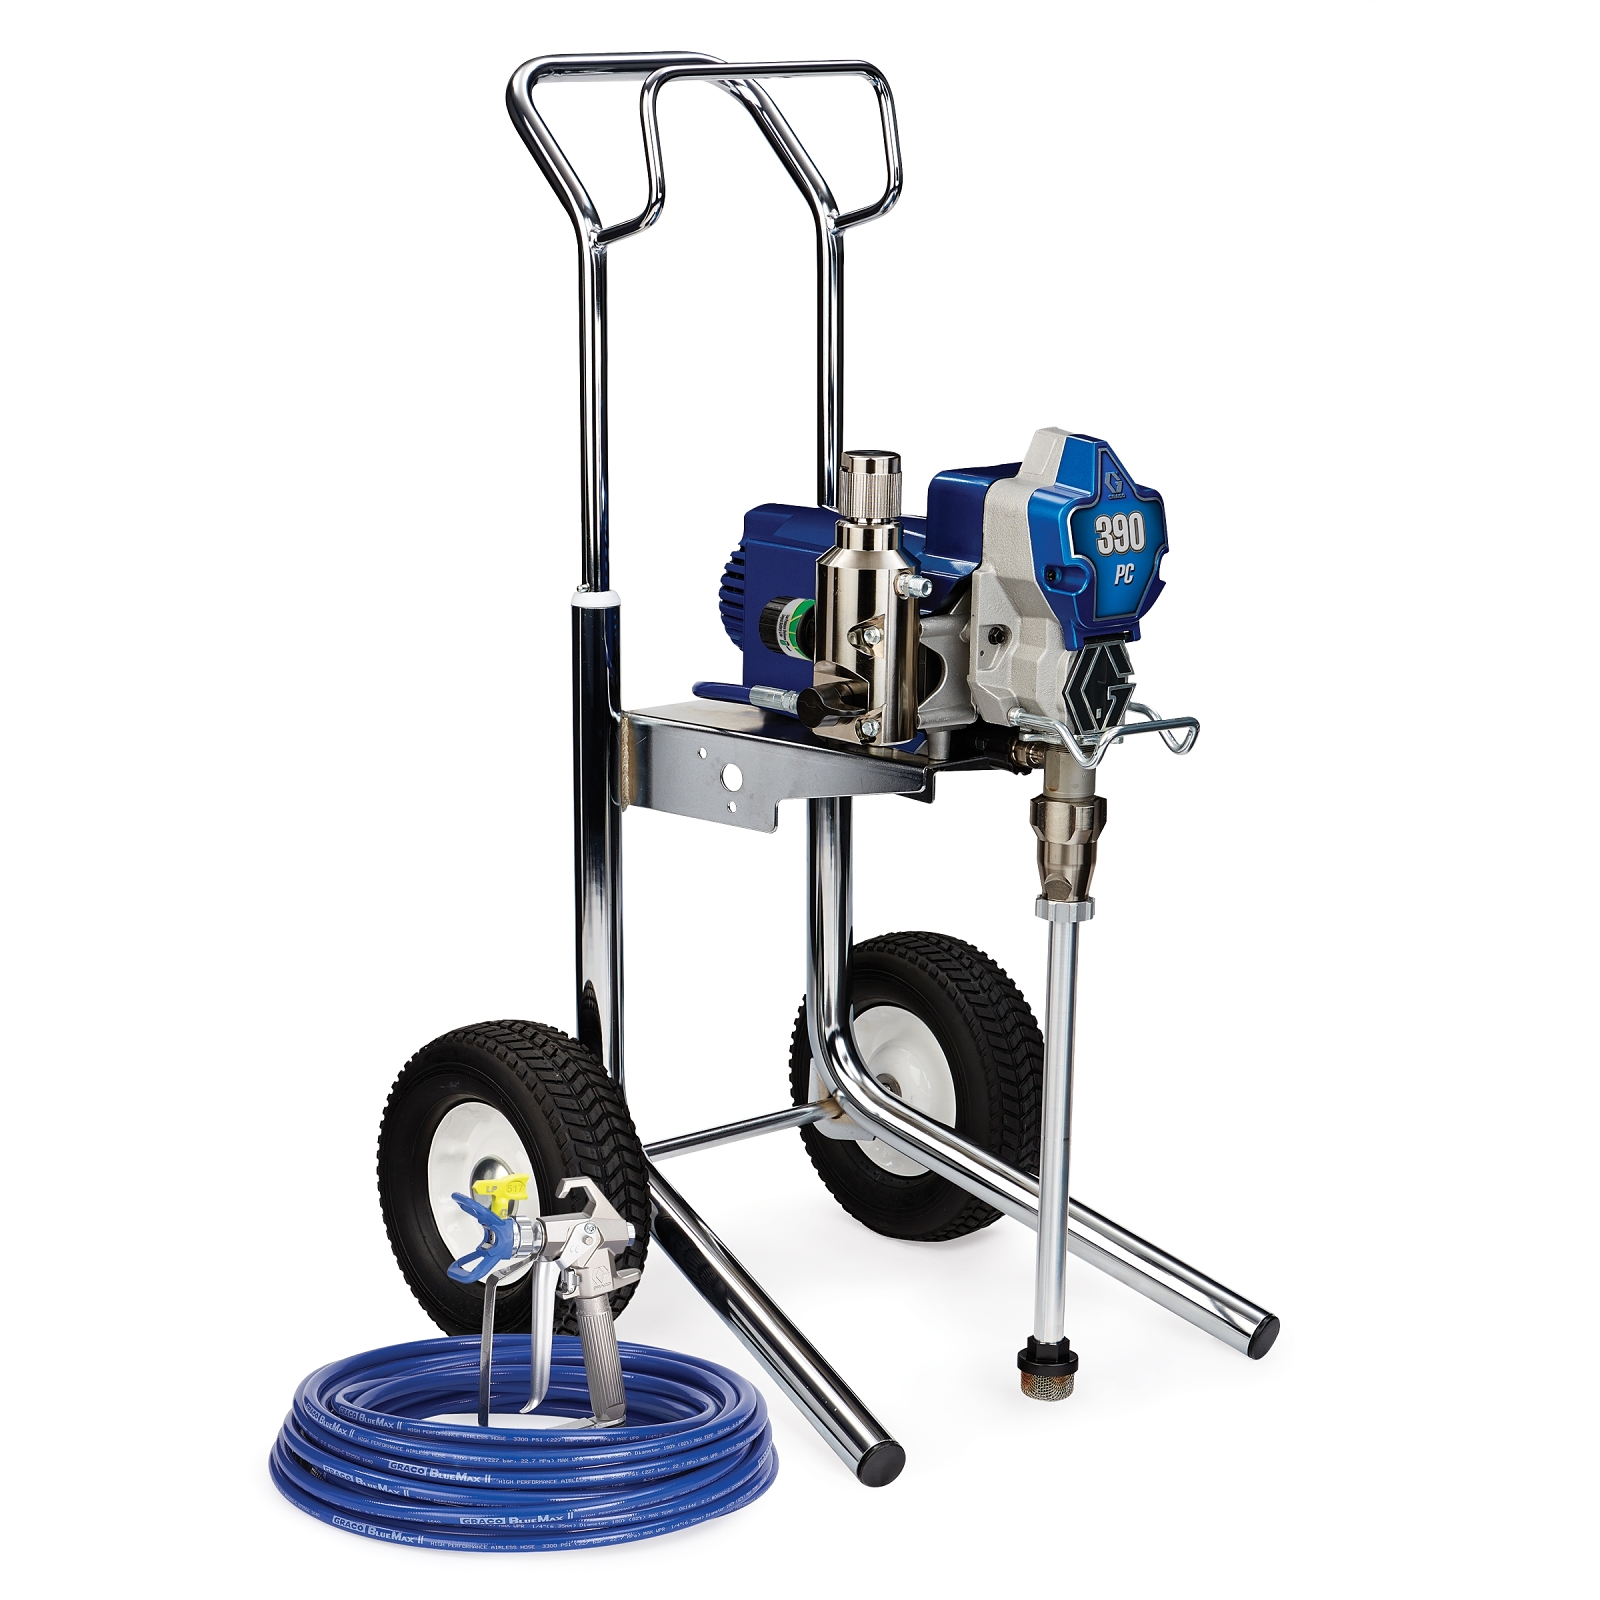 Graco 390 PC 3300 PSI @ 0.47 GPM Electric Airless Sprayer - Stand